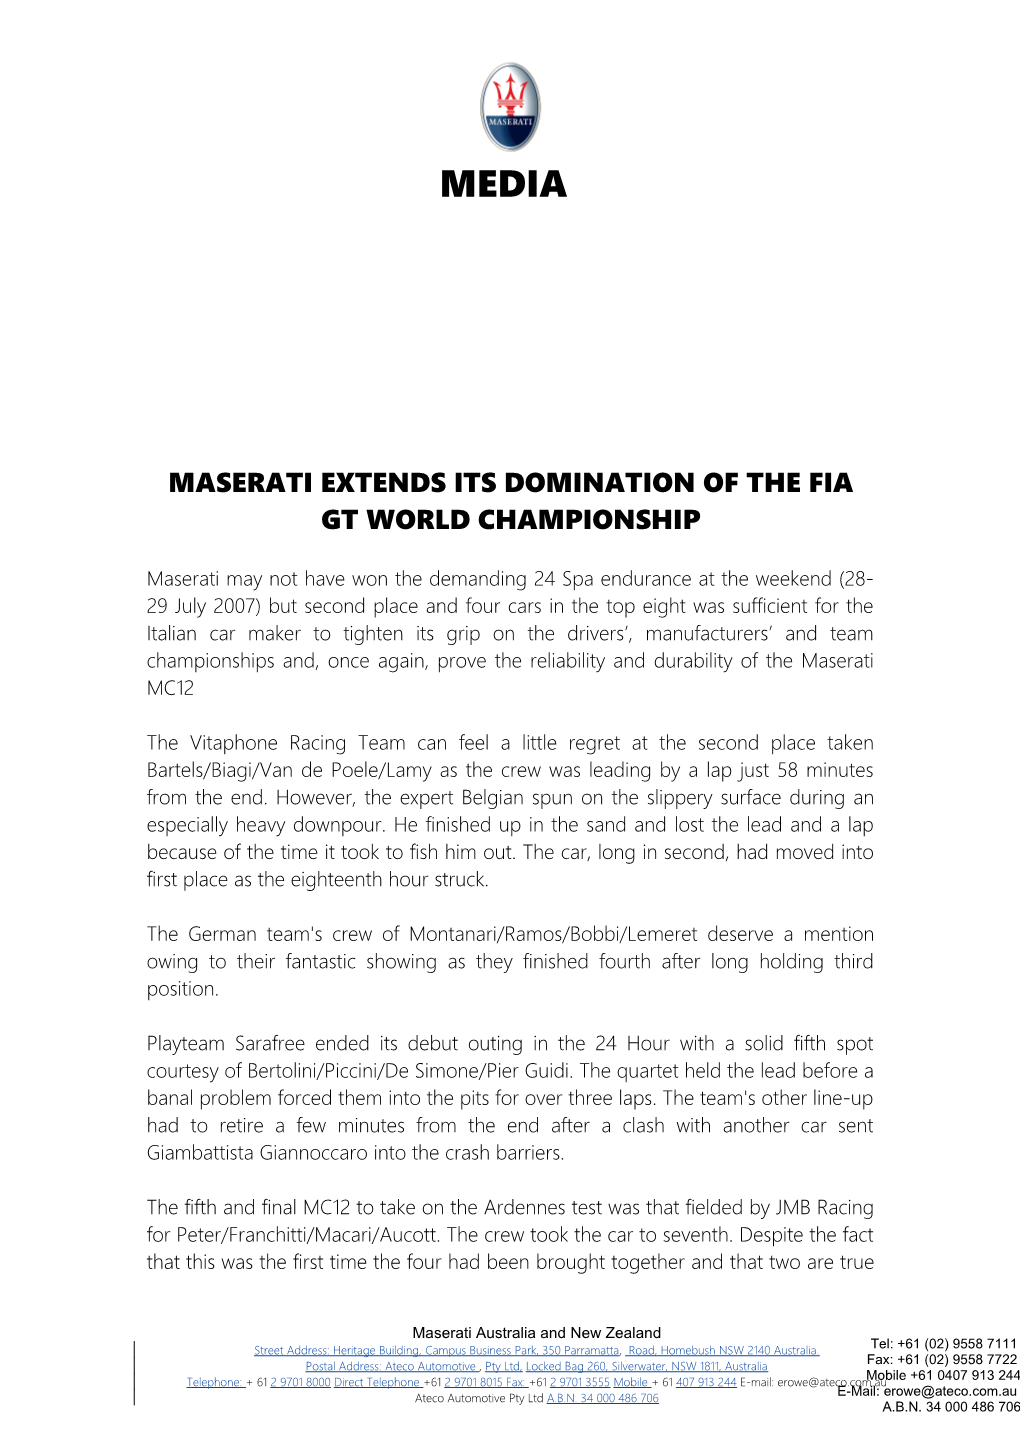 Maserati Extends Its Domination of the Fia Gt World Championship